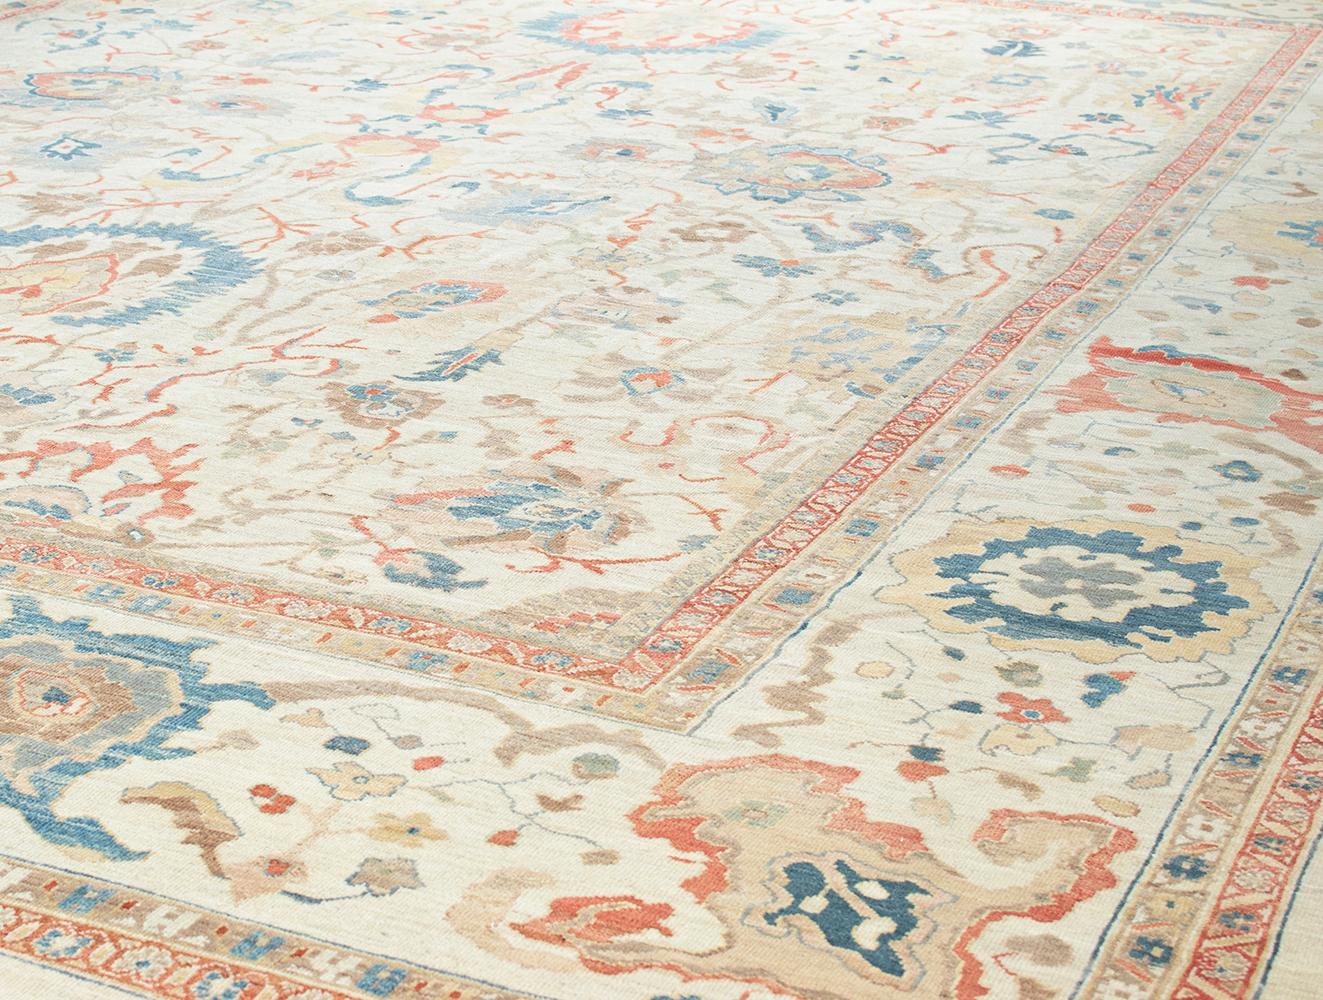 Hand-Knotted Original Persian Ziegler Sultanabad Rug For Sale